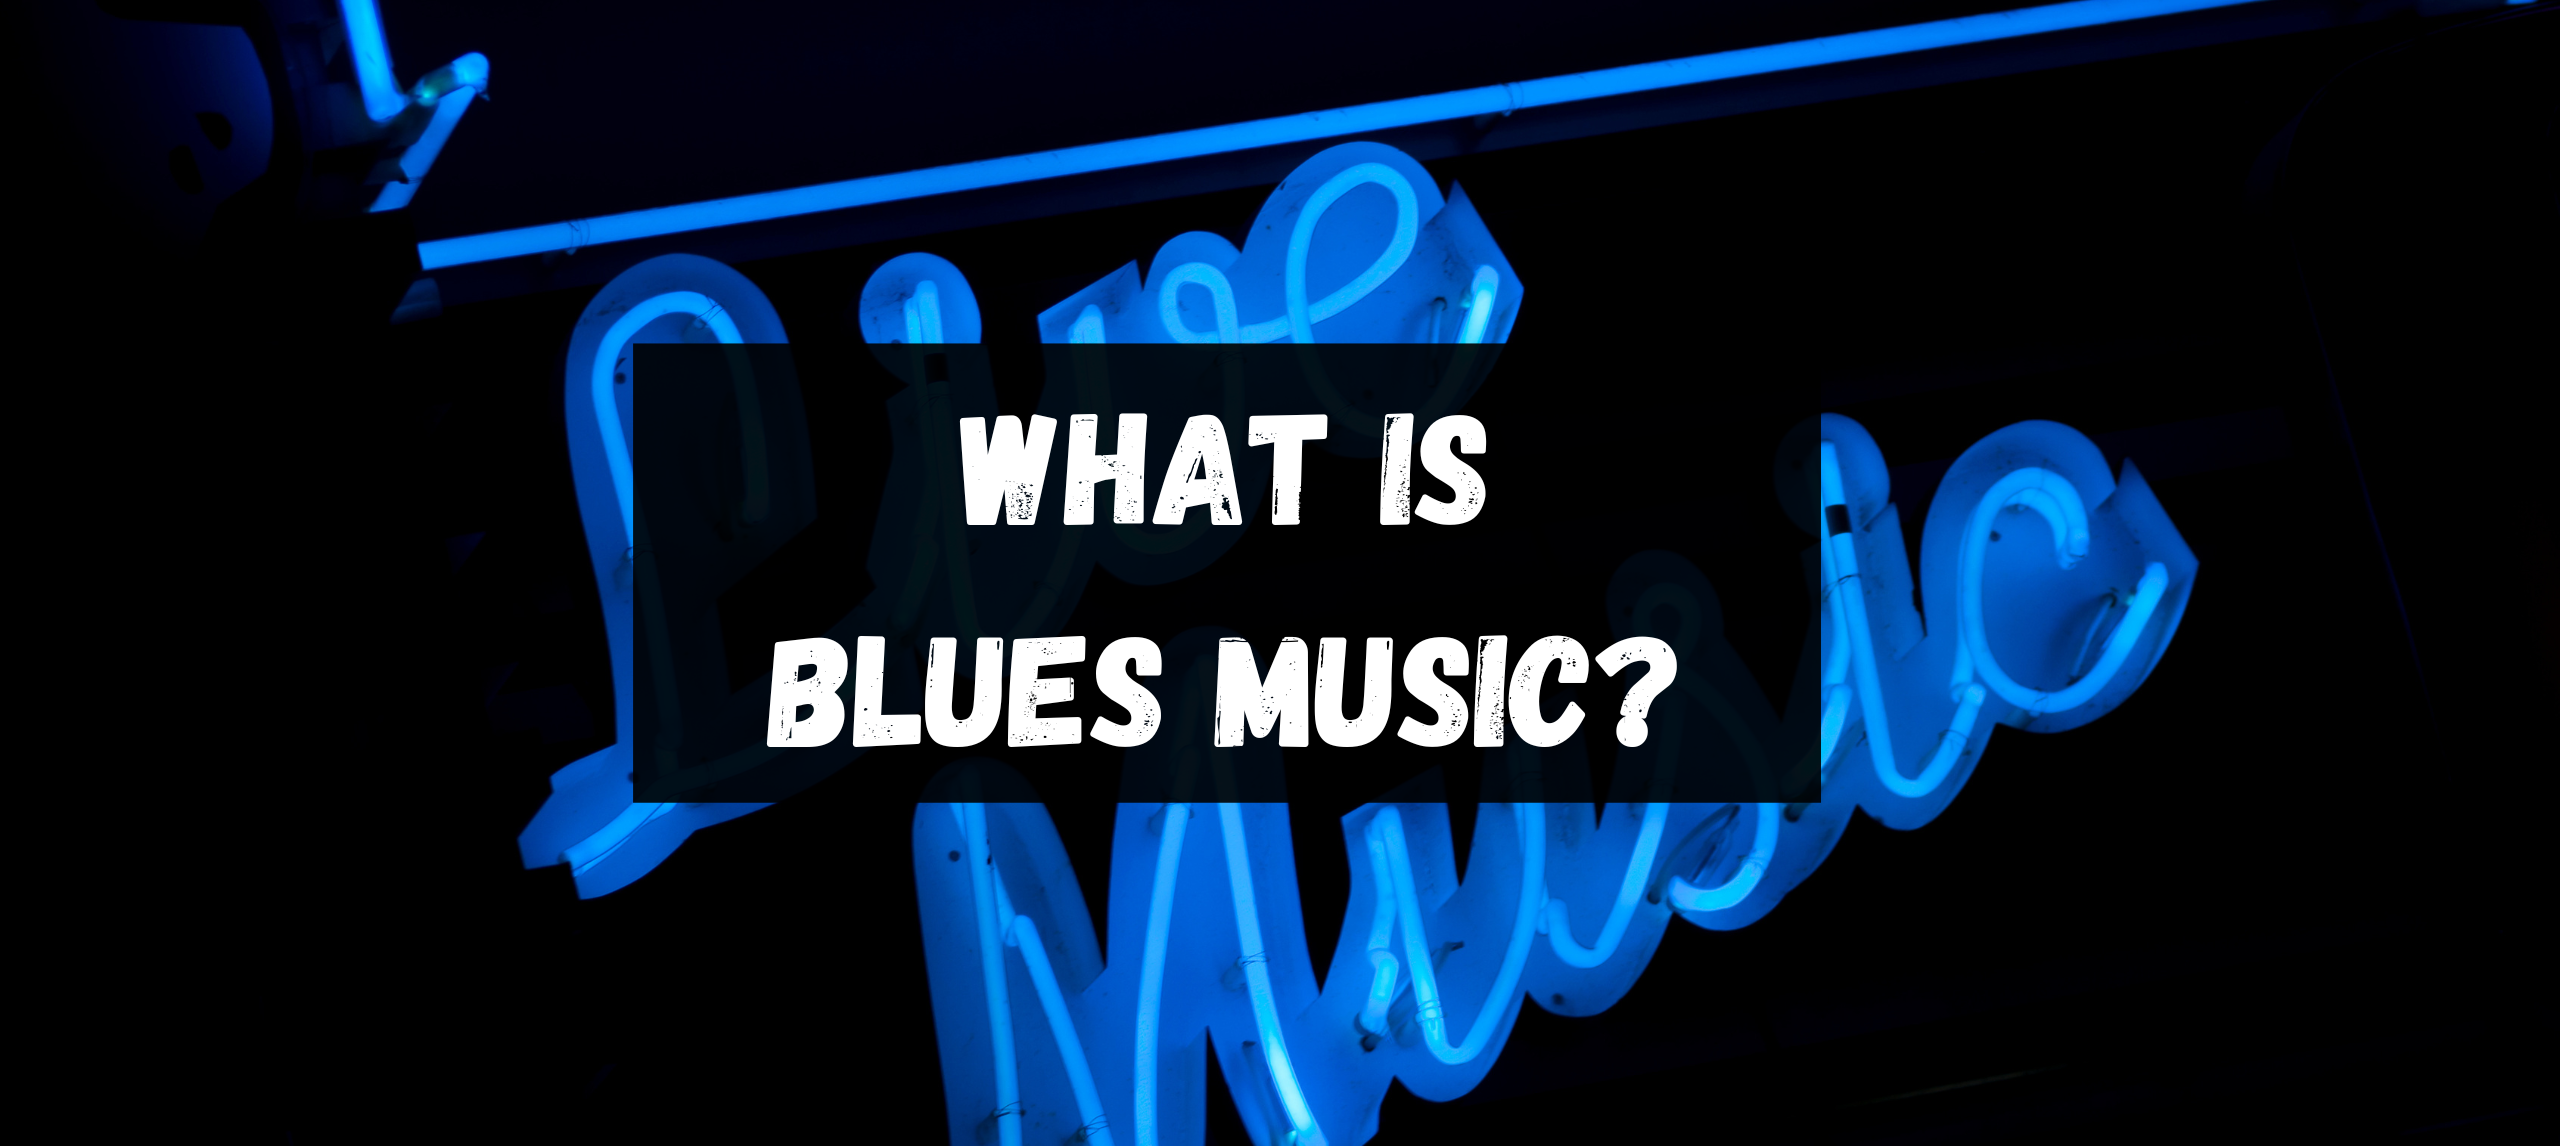 Blues, Definition, Artists, History, Characteristics, Types, Songs, &  Facts